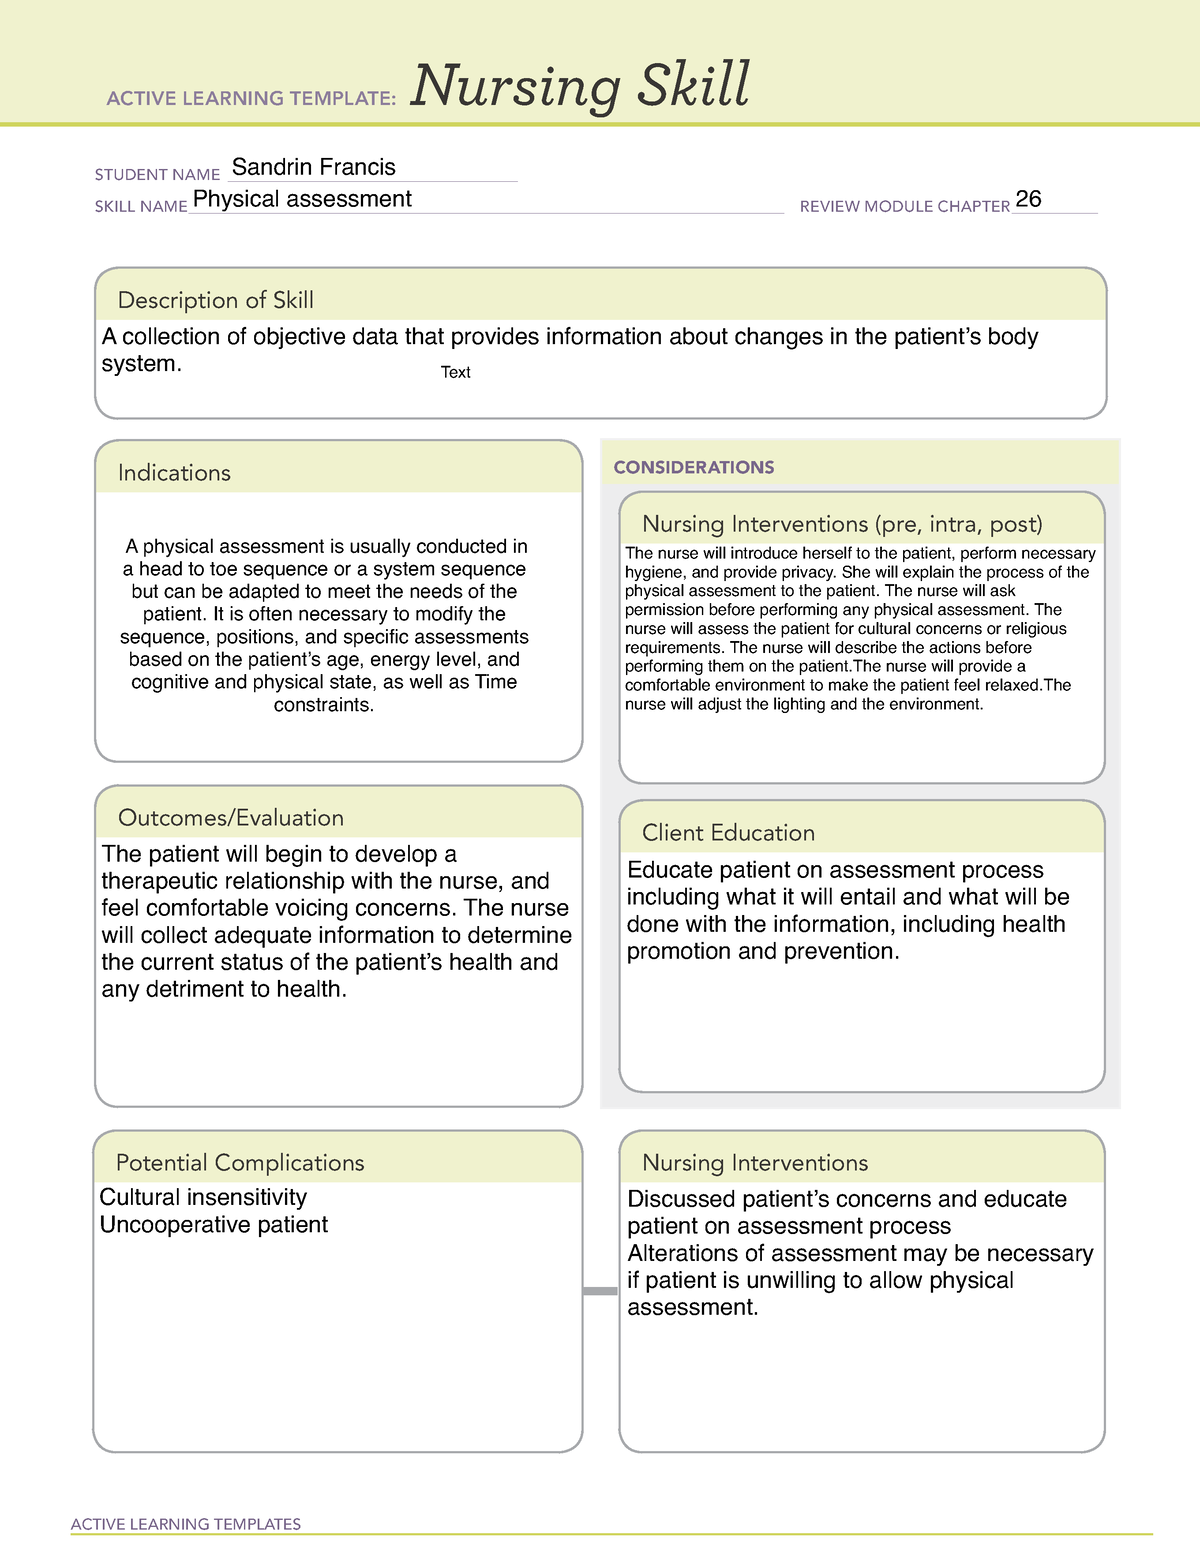 ATI Active Learning Templates